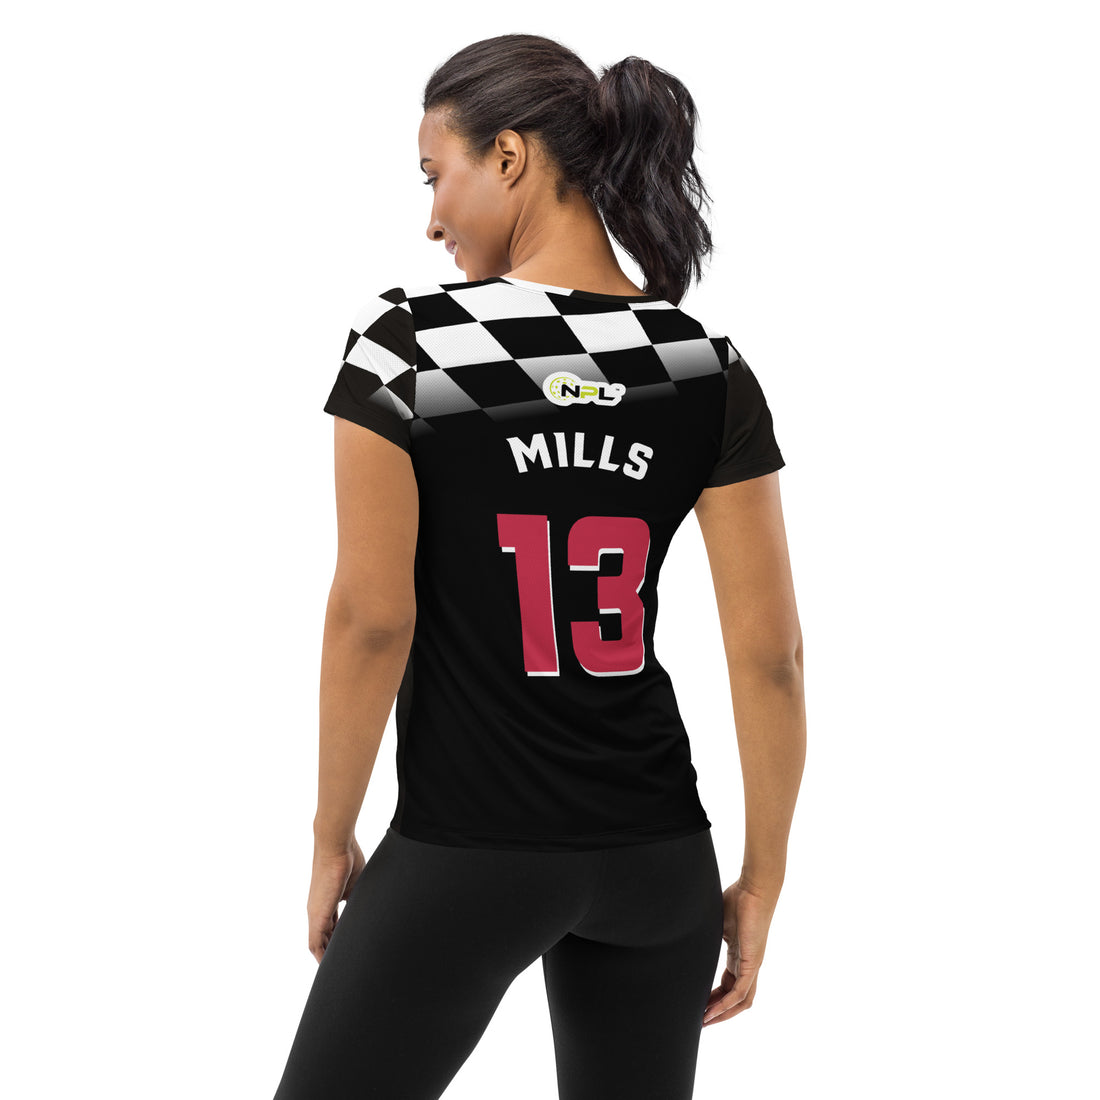 CHRIS MILLS 13, INDY DRIVERS™ 2023 AUTHENTIC SHORT SLEEVE  JERSEY - BLACK